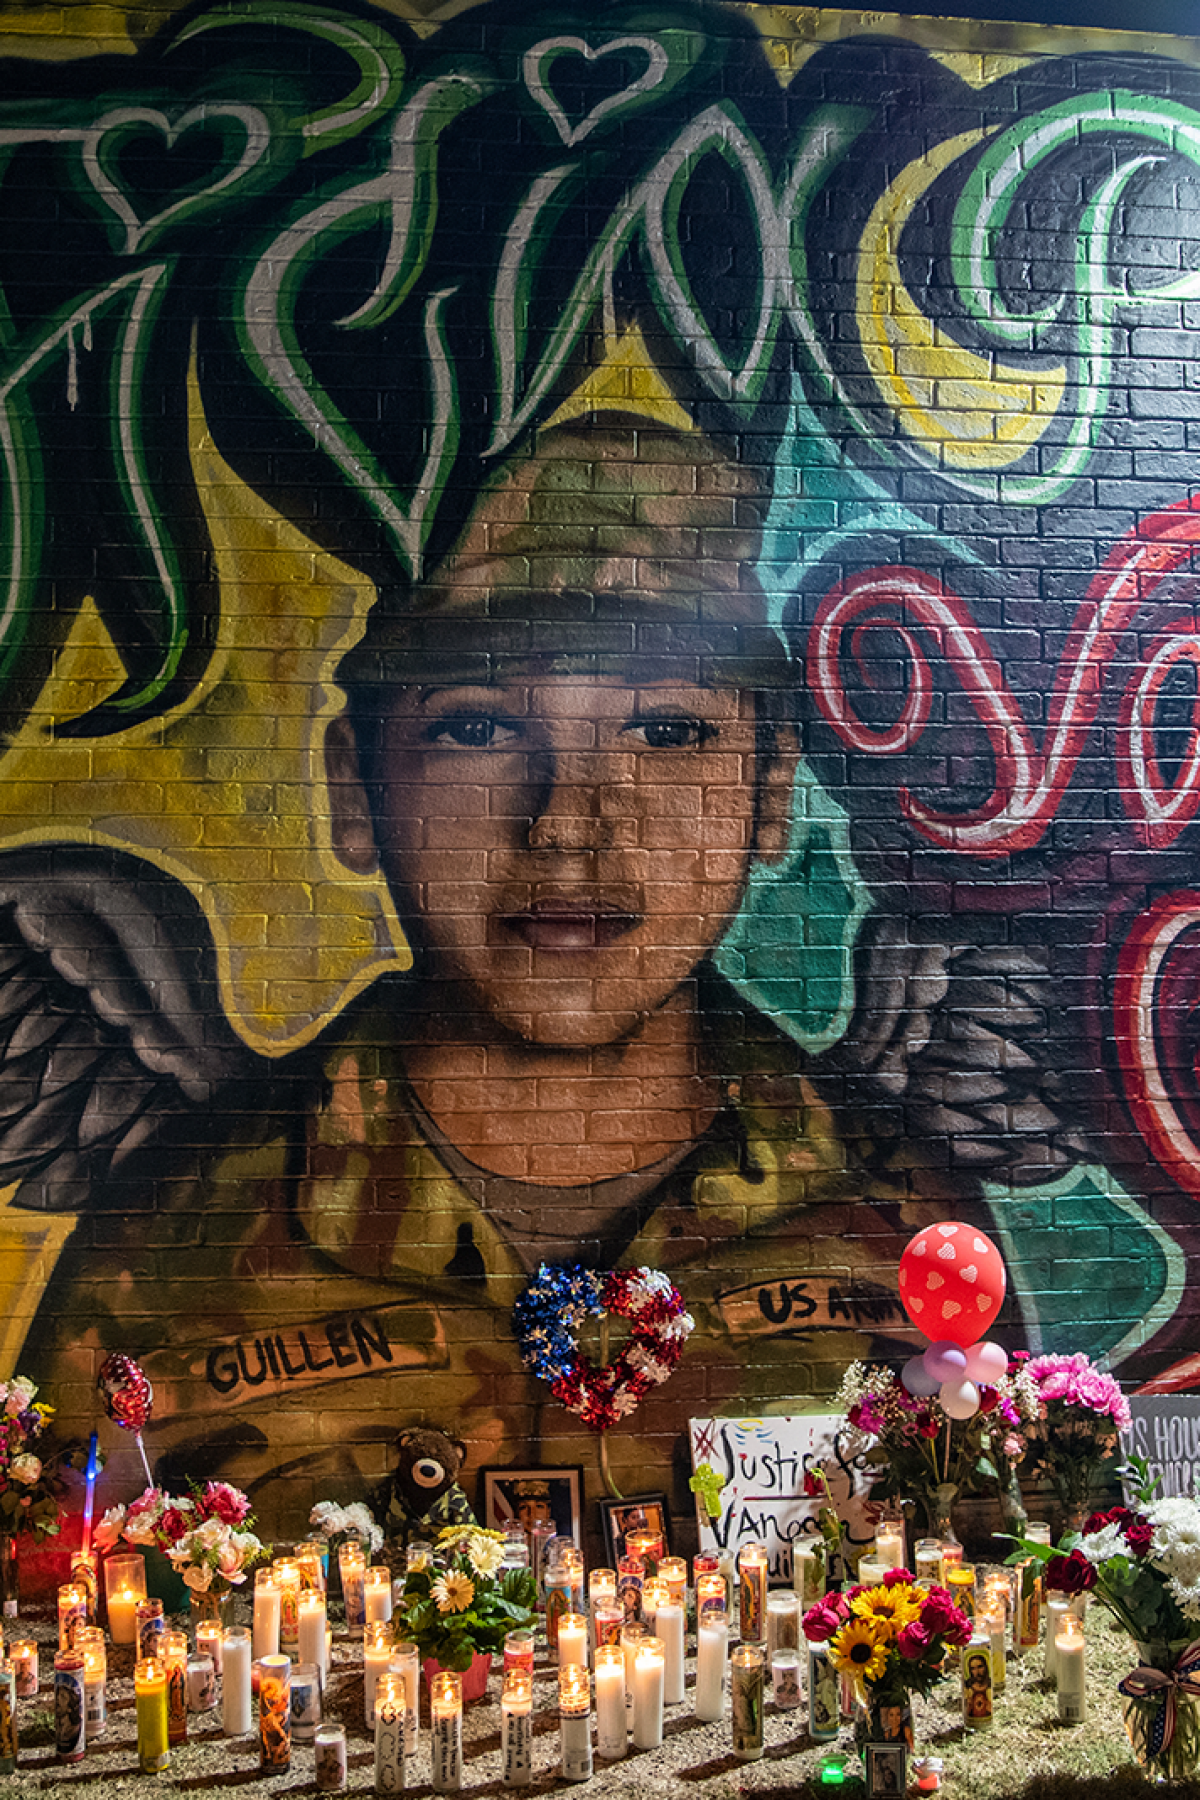 Flowers adorn a mural of Vanessa Guillen, a soldier based at nearby Fort Hood on July 6, 2020 in Austin, Texas. Photo by Sergio Flores/Getty Images